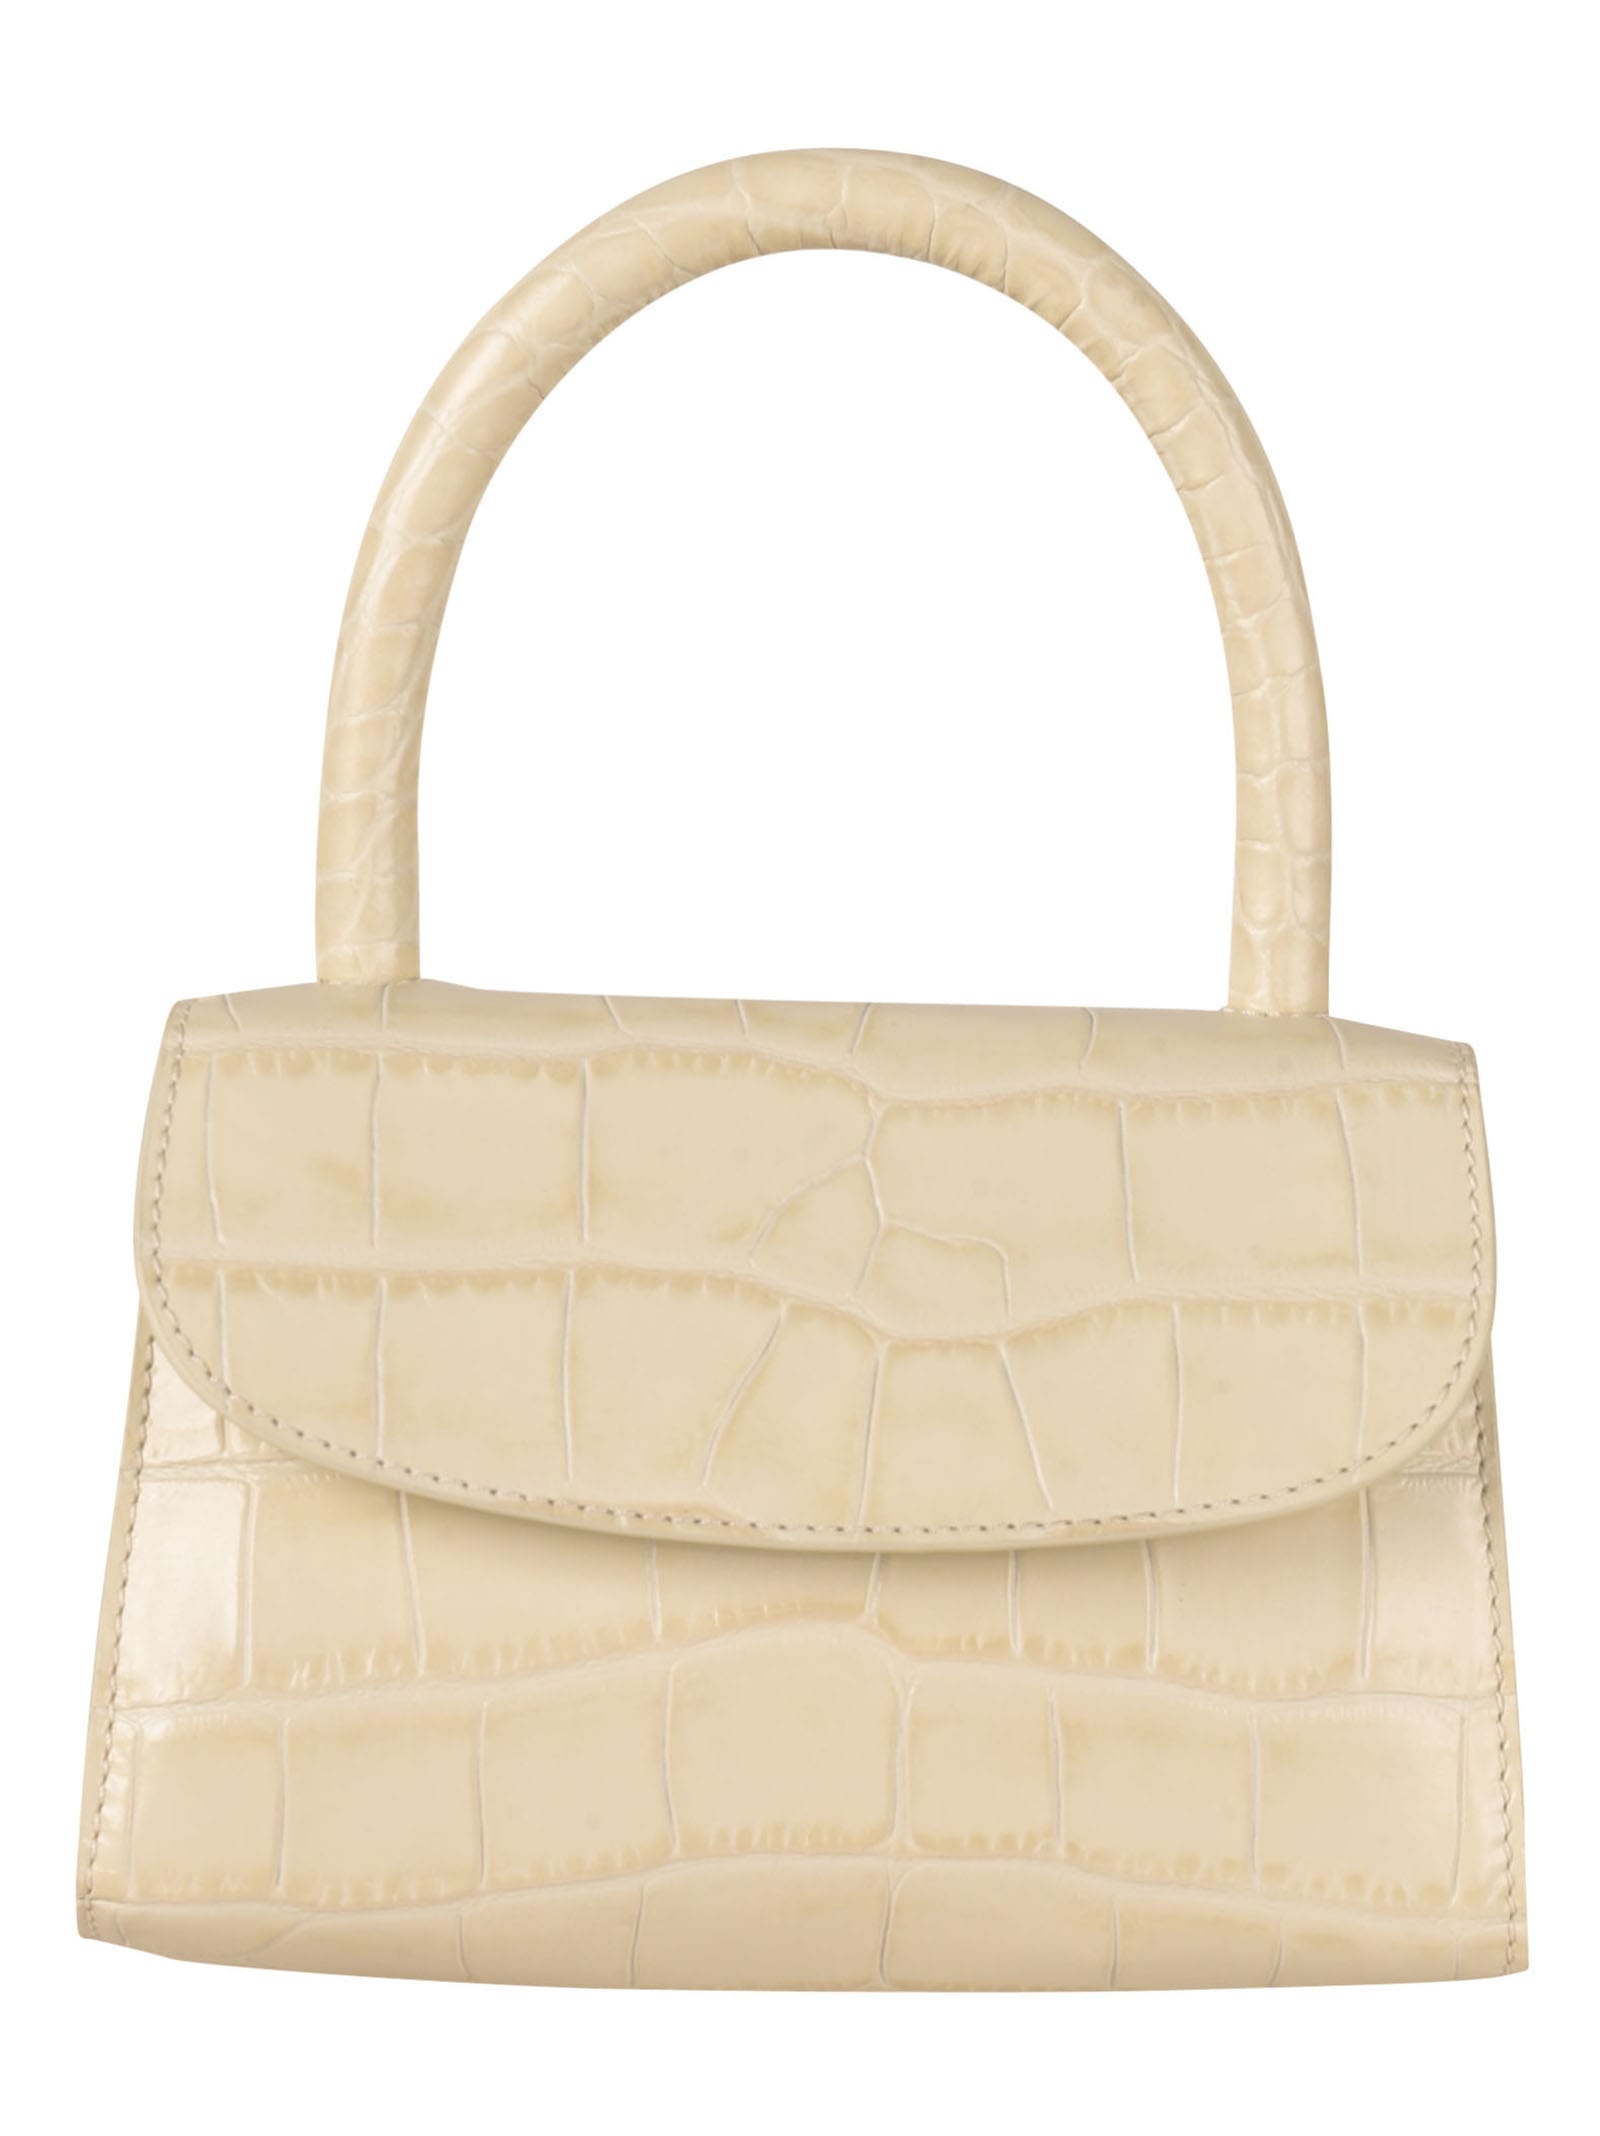 BY FAR Flap Skinned Tote